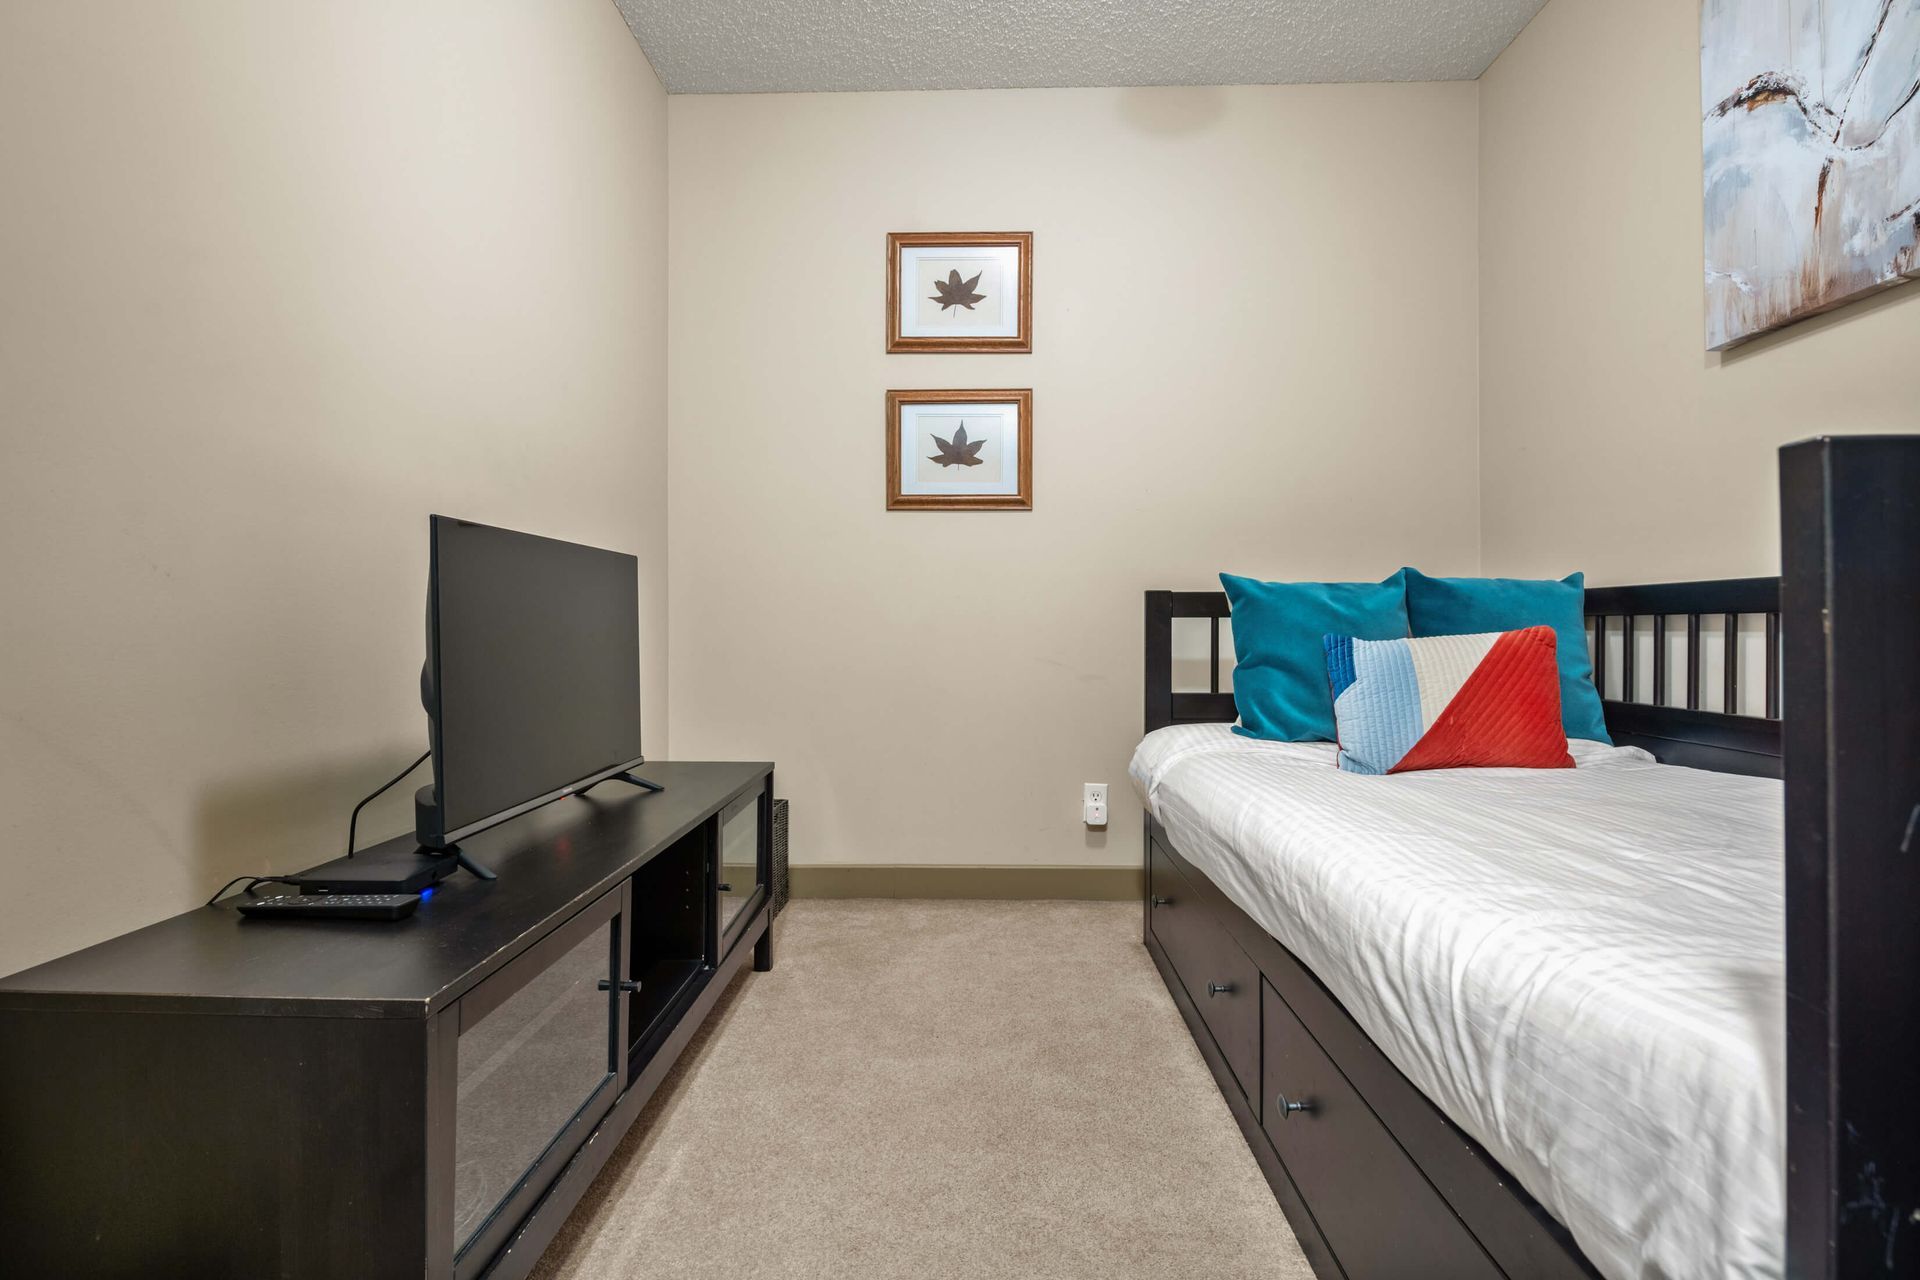 Den at the Lake Windermere Pointe Condos in Invermere, BC managed by Aisling Baile Property Management